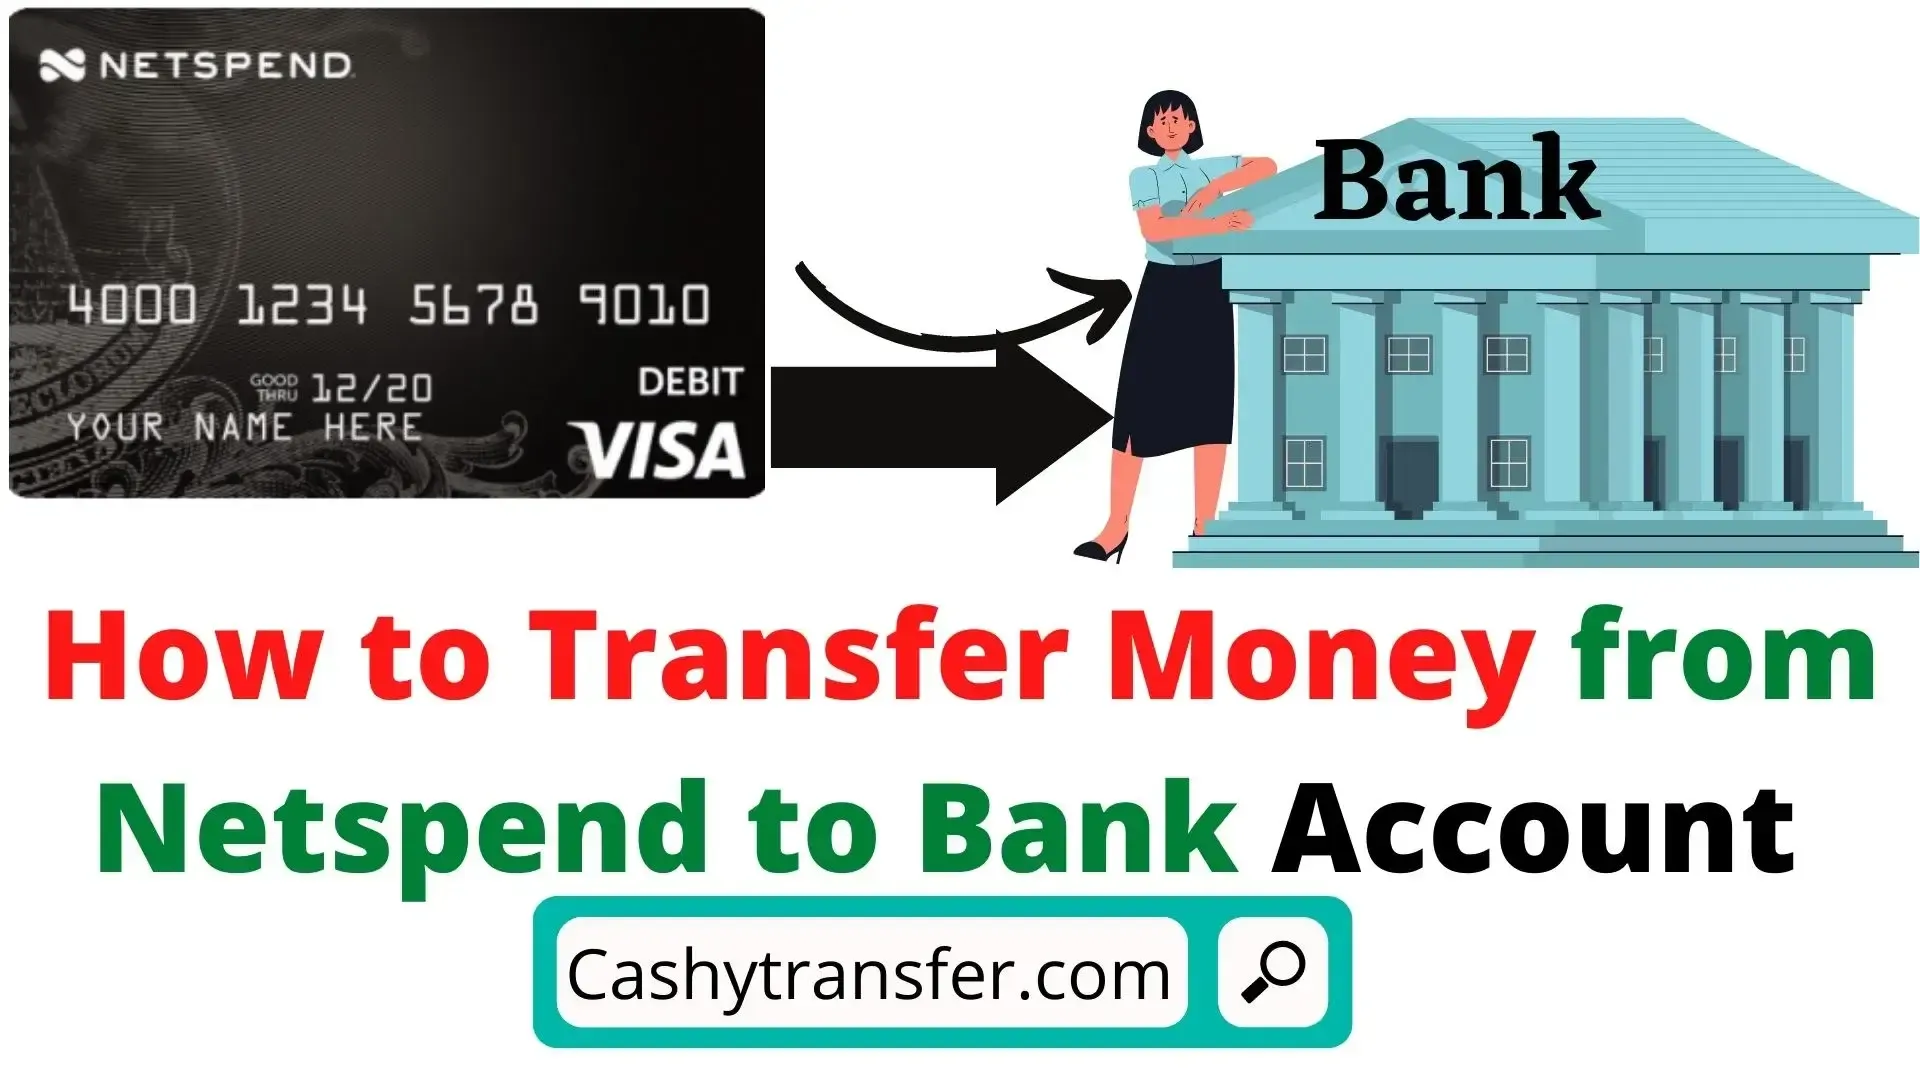 Transfer Money from Netspend to Bank Account